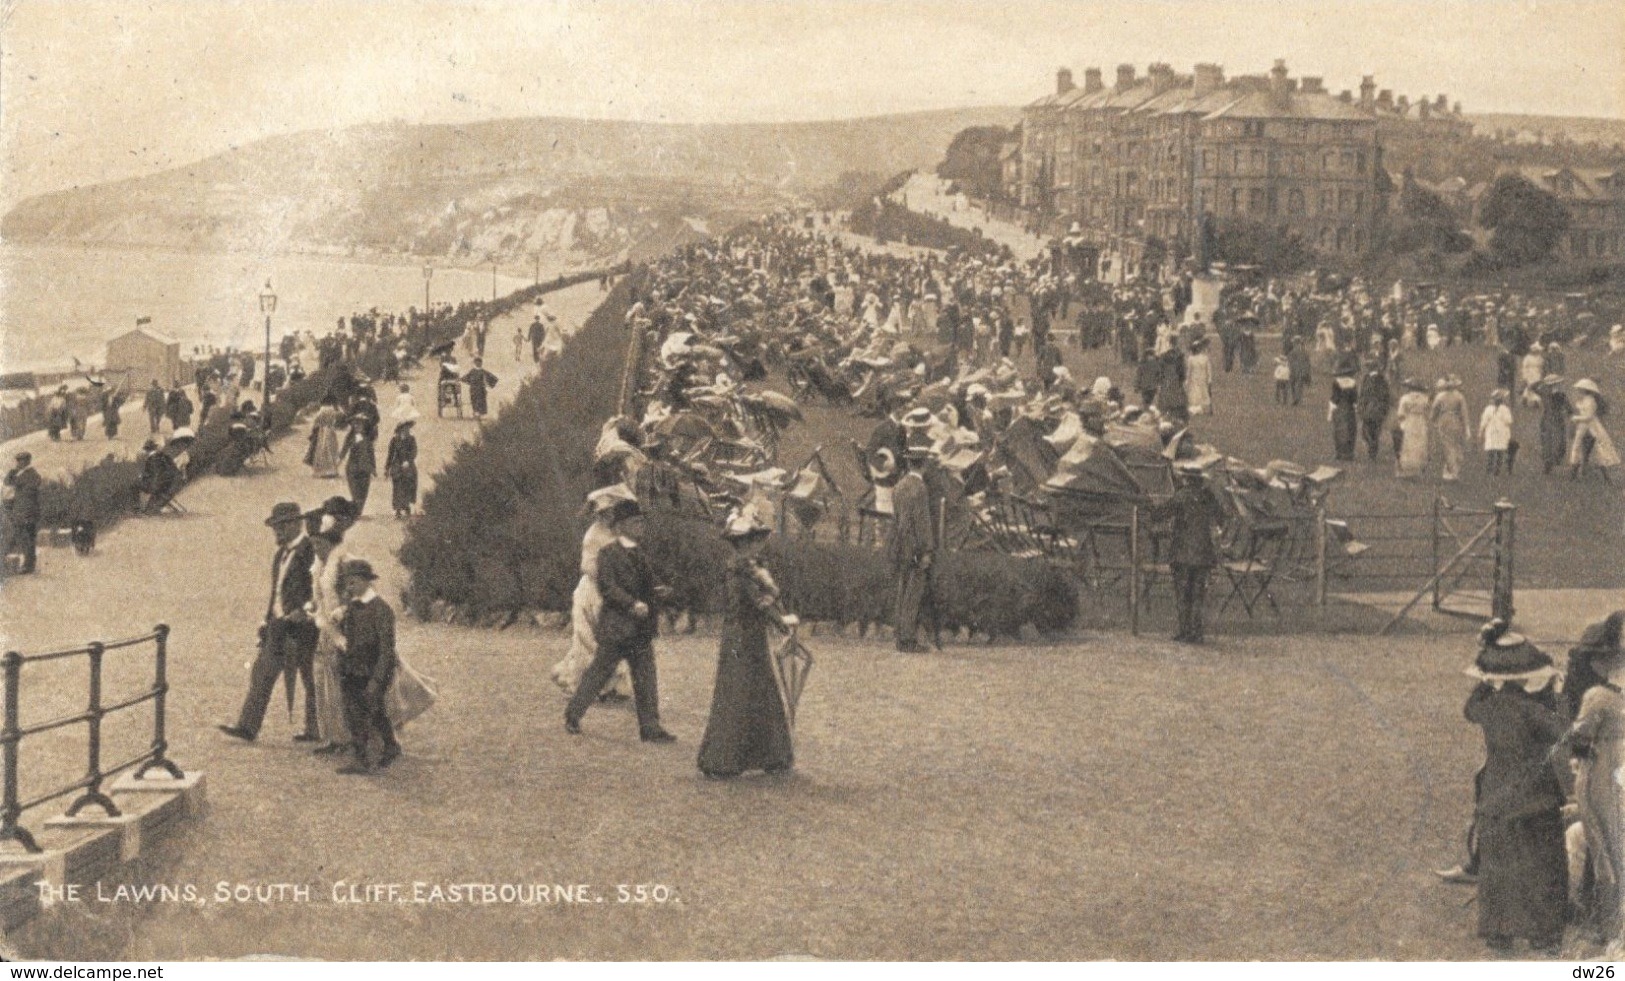 Eastbourne - The Lawns, South Cliff - Post Card W.B. Series N° 550 - Eastbourne